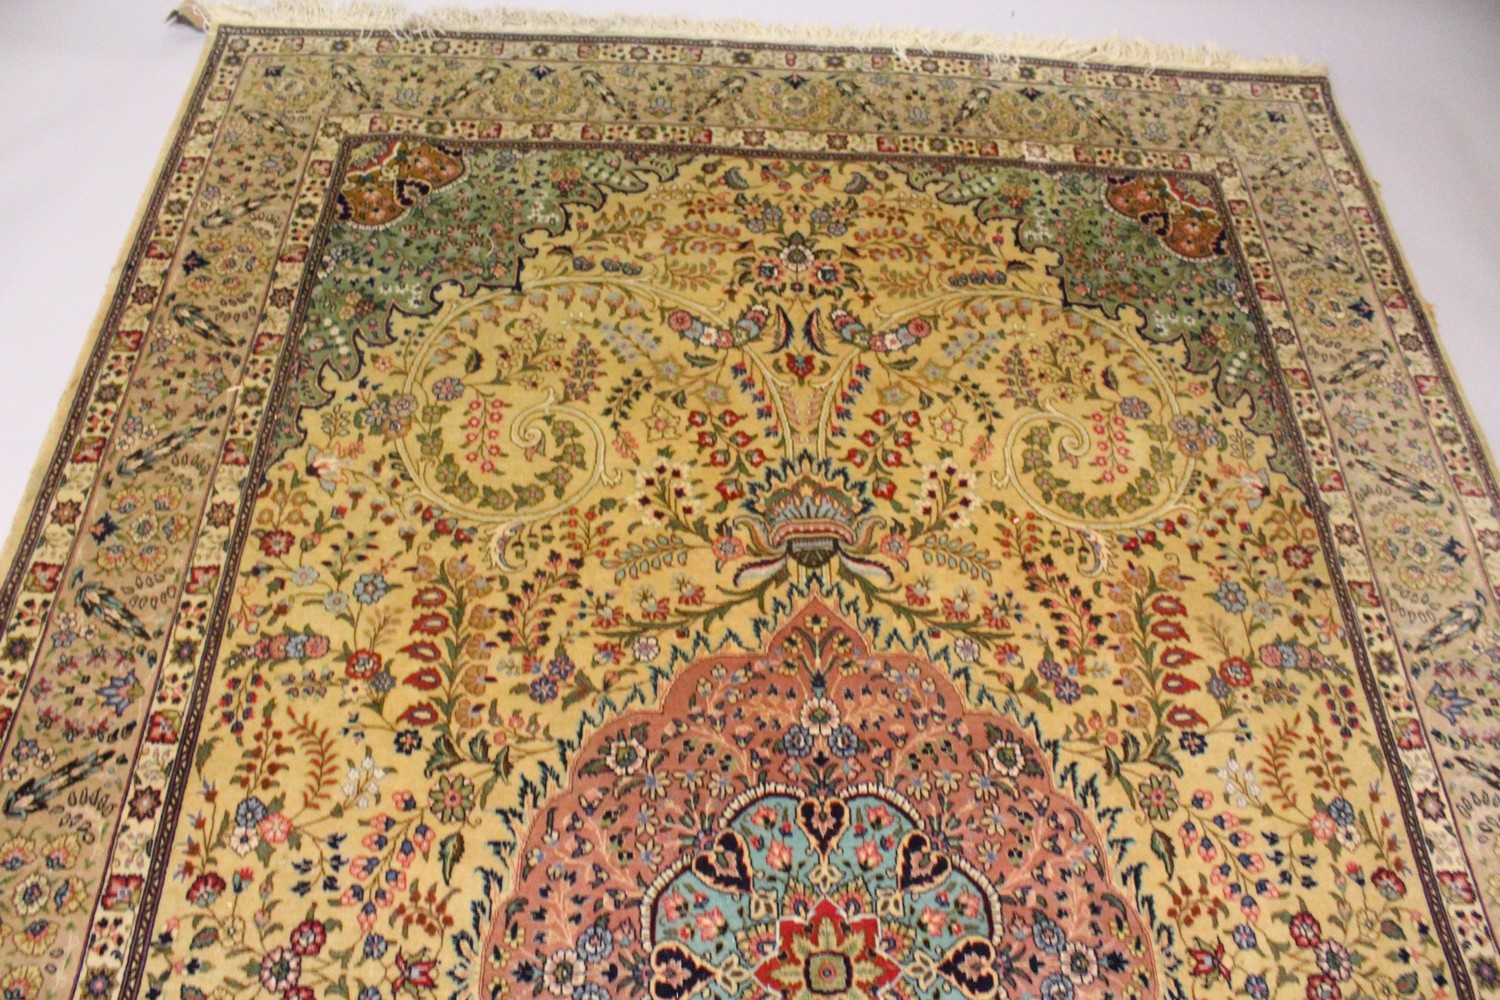 A GOOD PERSIAN CARPET, 20TH CENTURY, beige ground with central floral panel within a similar border. - Image 6 of 24